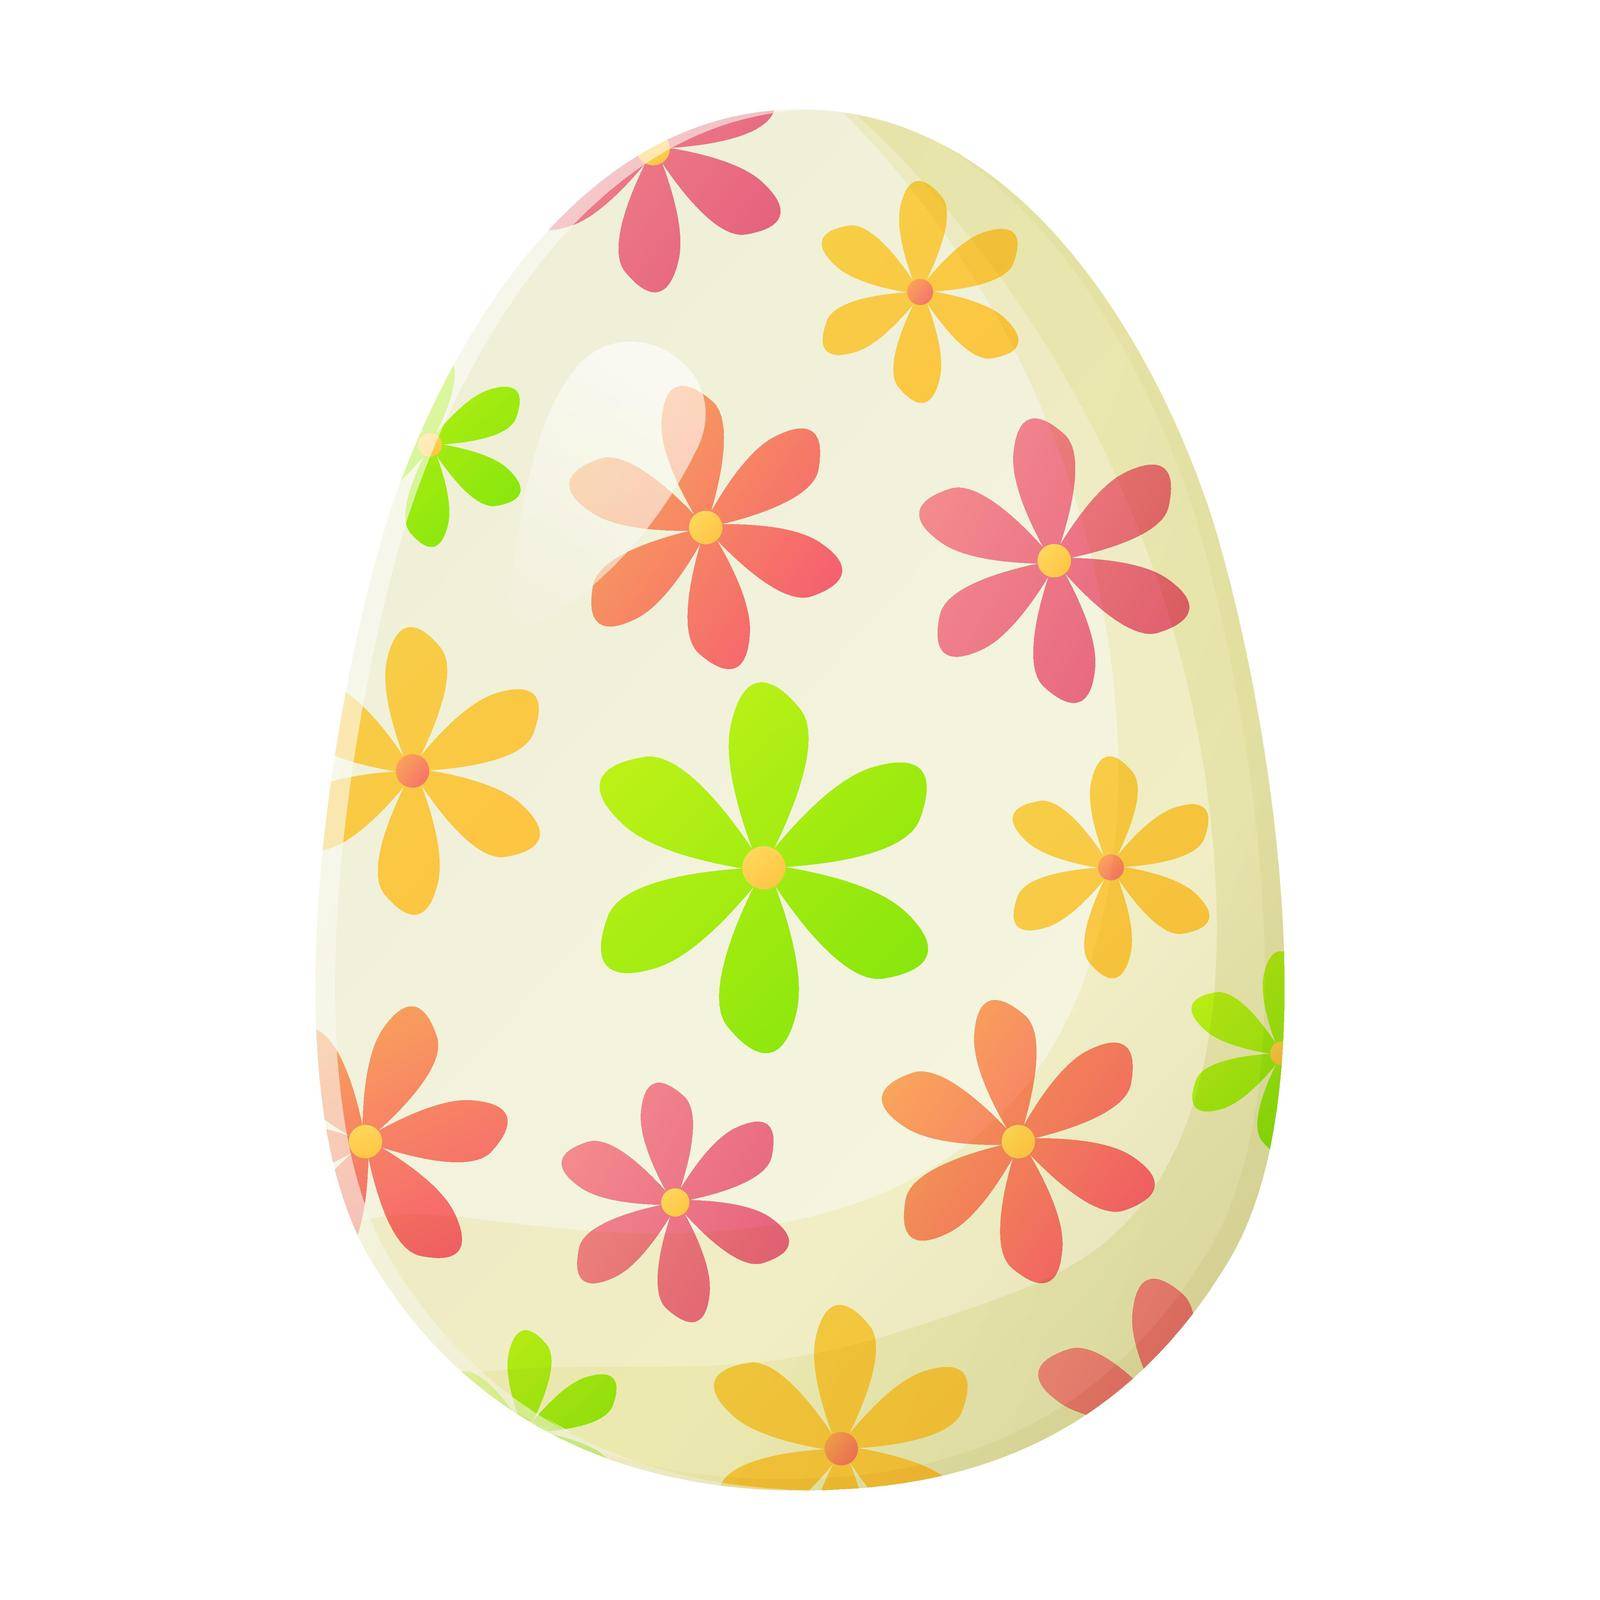 Cute realistic Easter egg painted with with flowers pattern. Can be used as easter hunt element for web banners, posters and web pages. Stock vector illustration in cartoon style isolated on white background by Daaridna